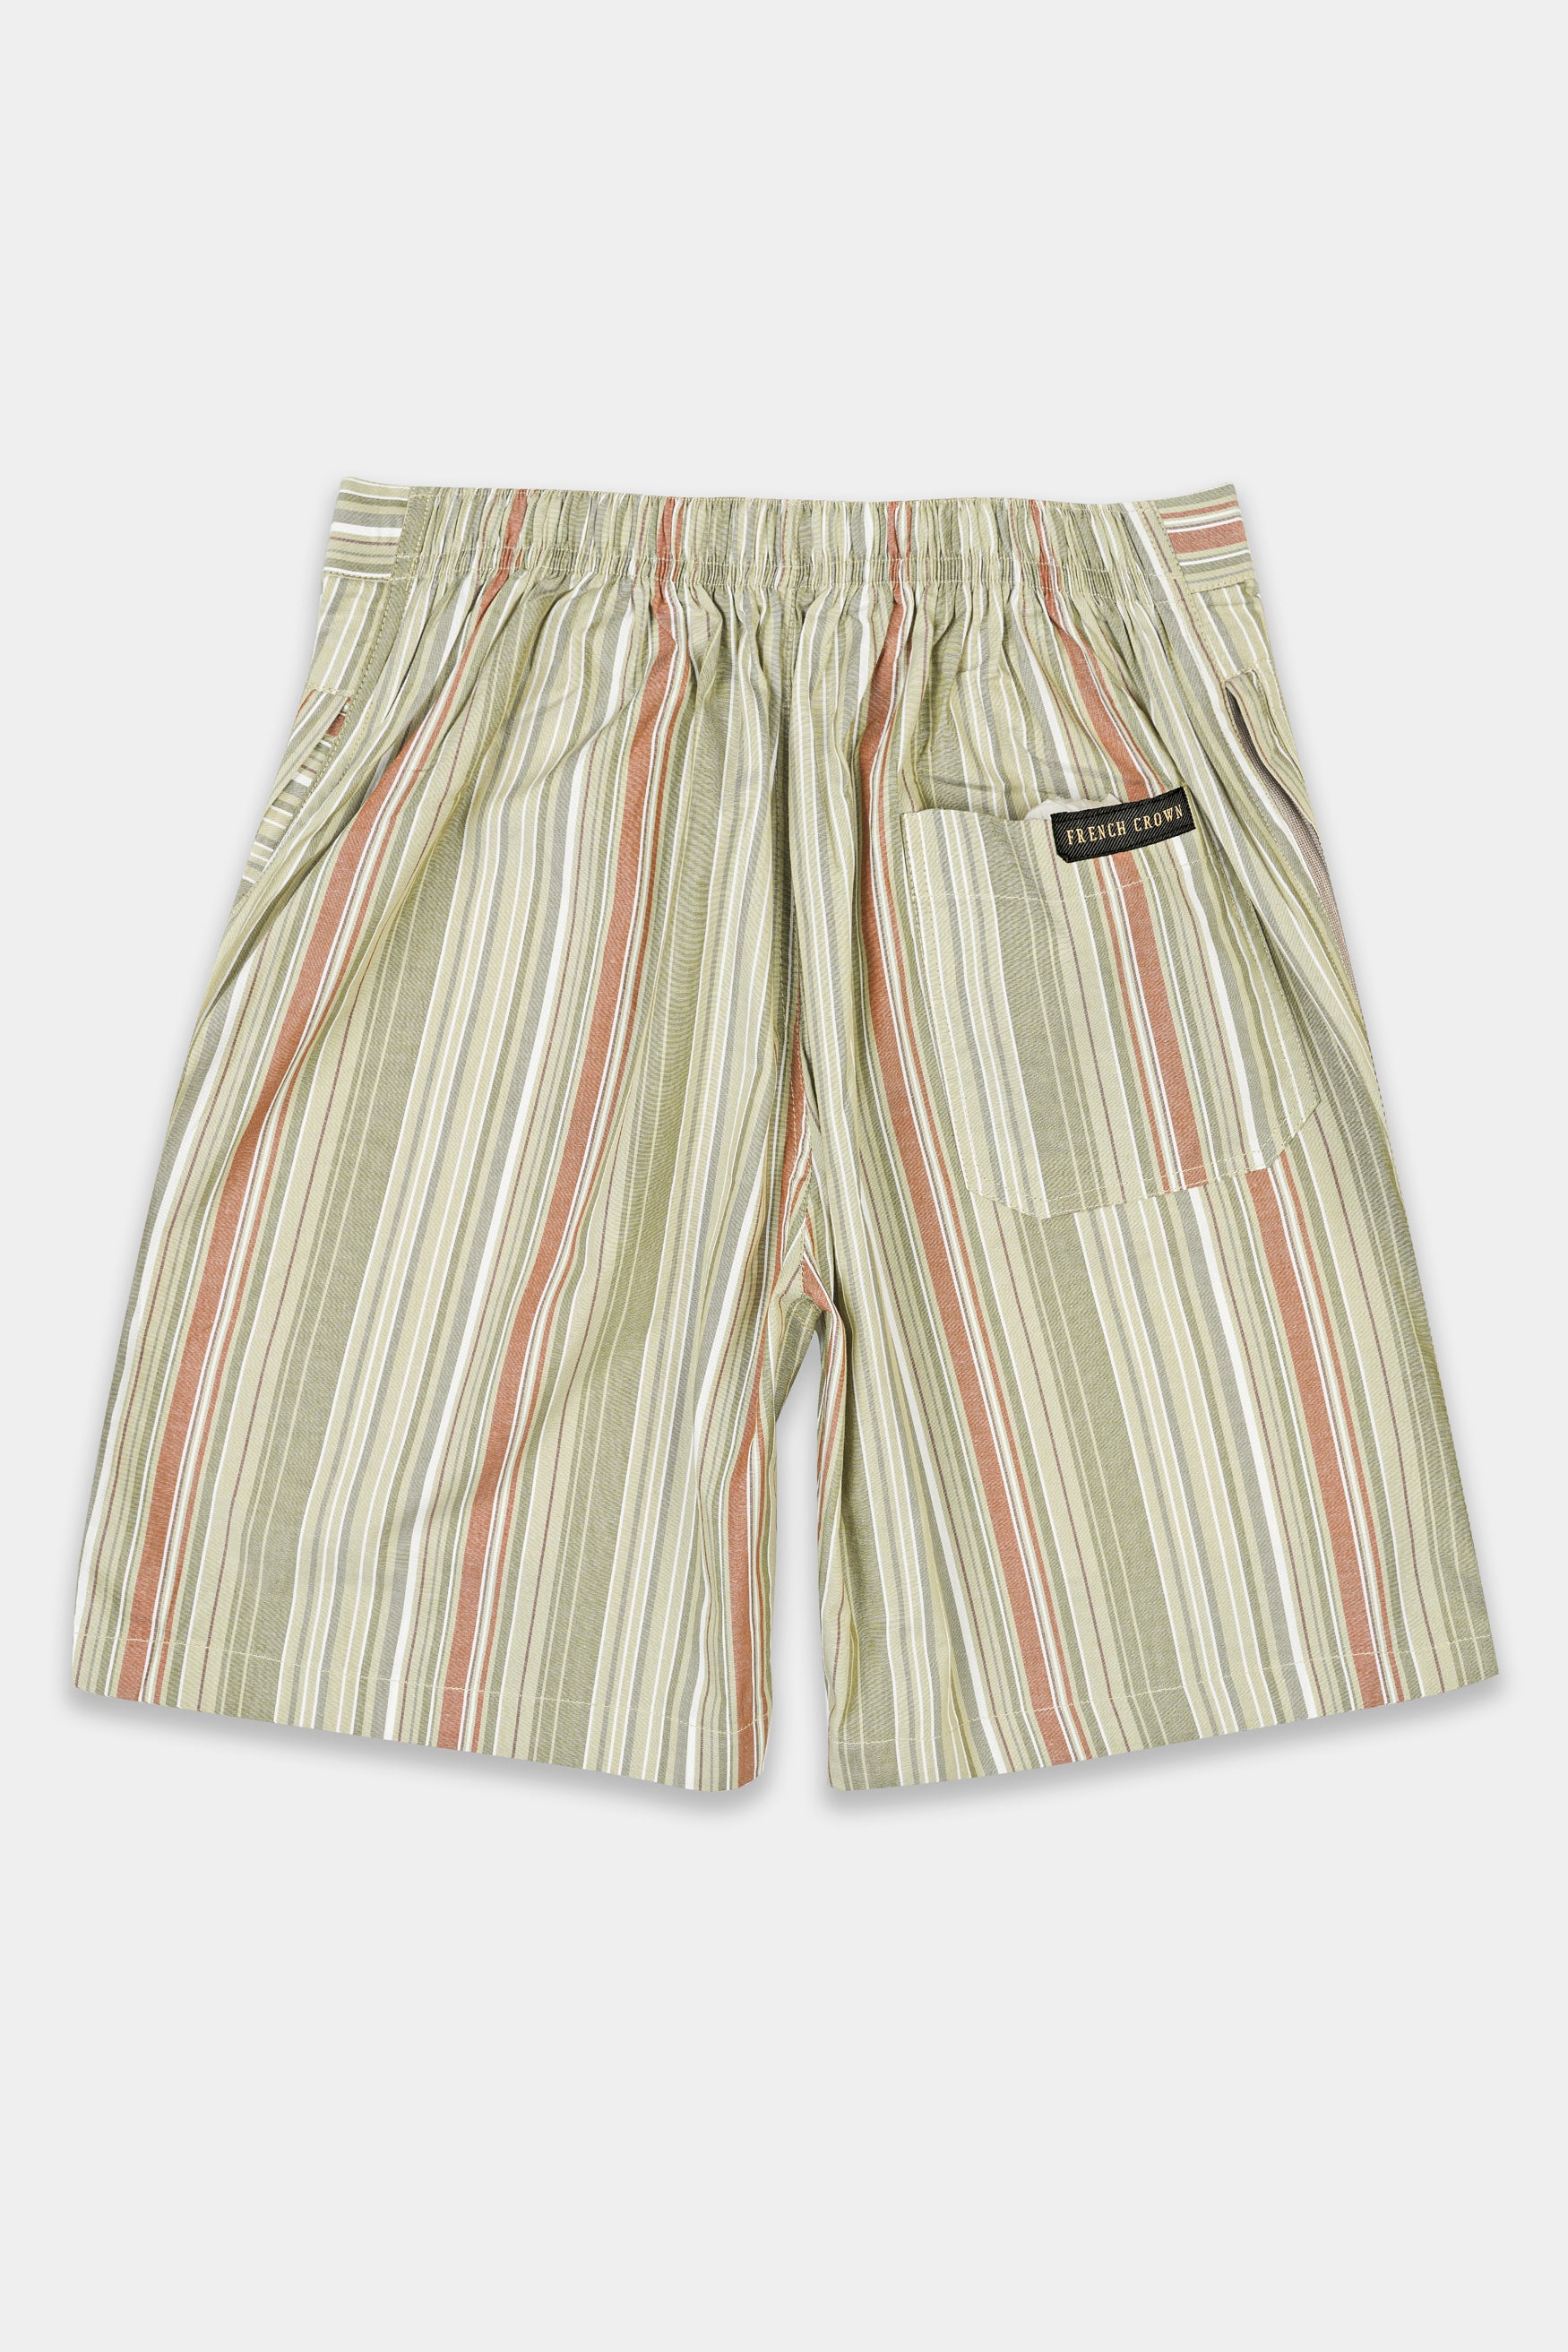 Tallow Brown with Tawny orange Multicolor Striped Chambray Shorts SR348-28,  SR348-30,  SR348-32,  SR348-34,  SR348-36,  SR348-38,  SR348-40,  SR348-42,  SR348-44